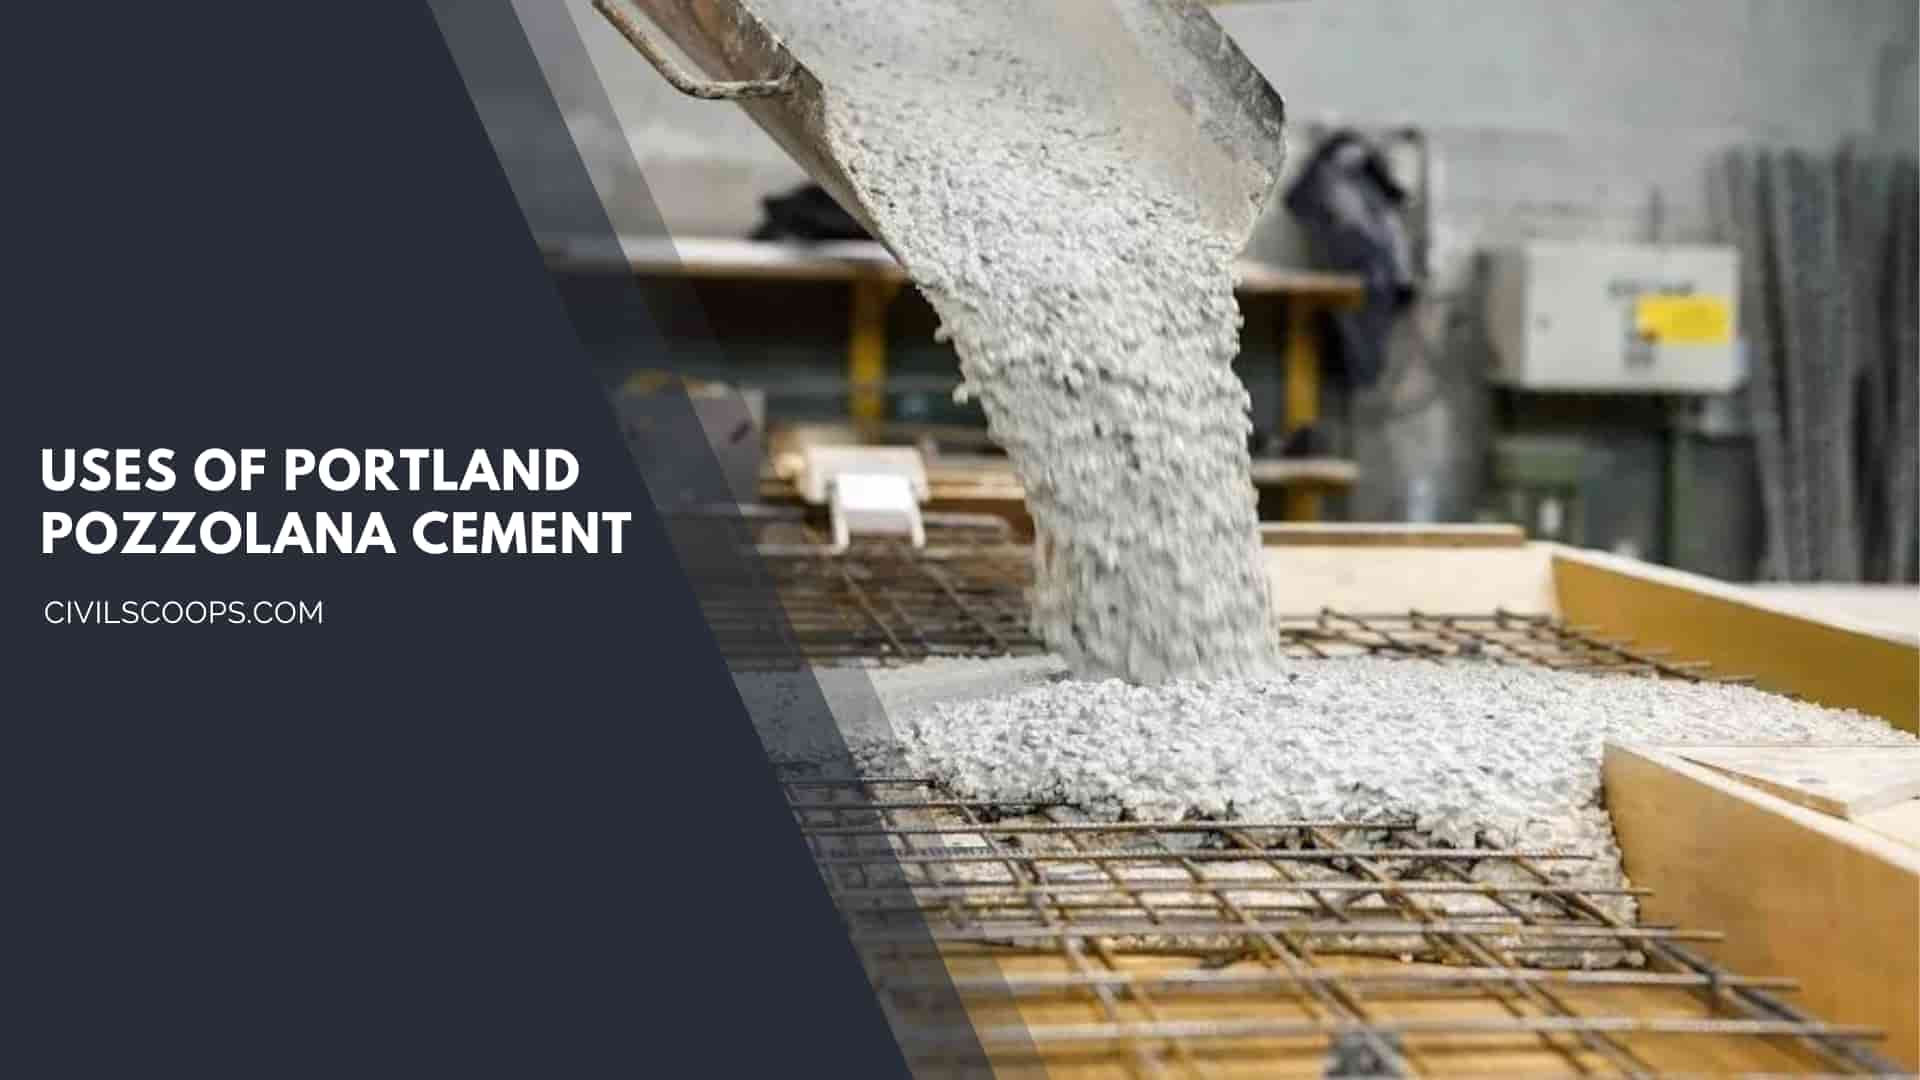 Uses of Portland Pozzolana Cement